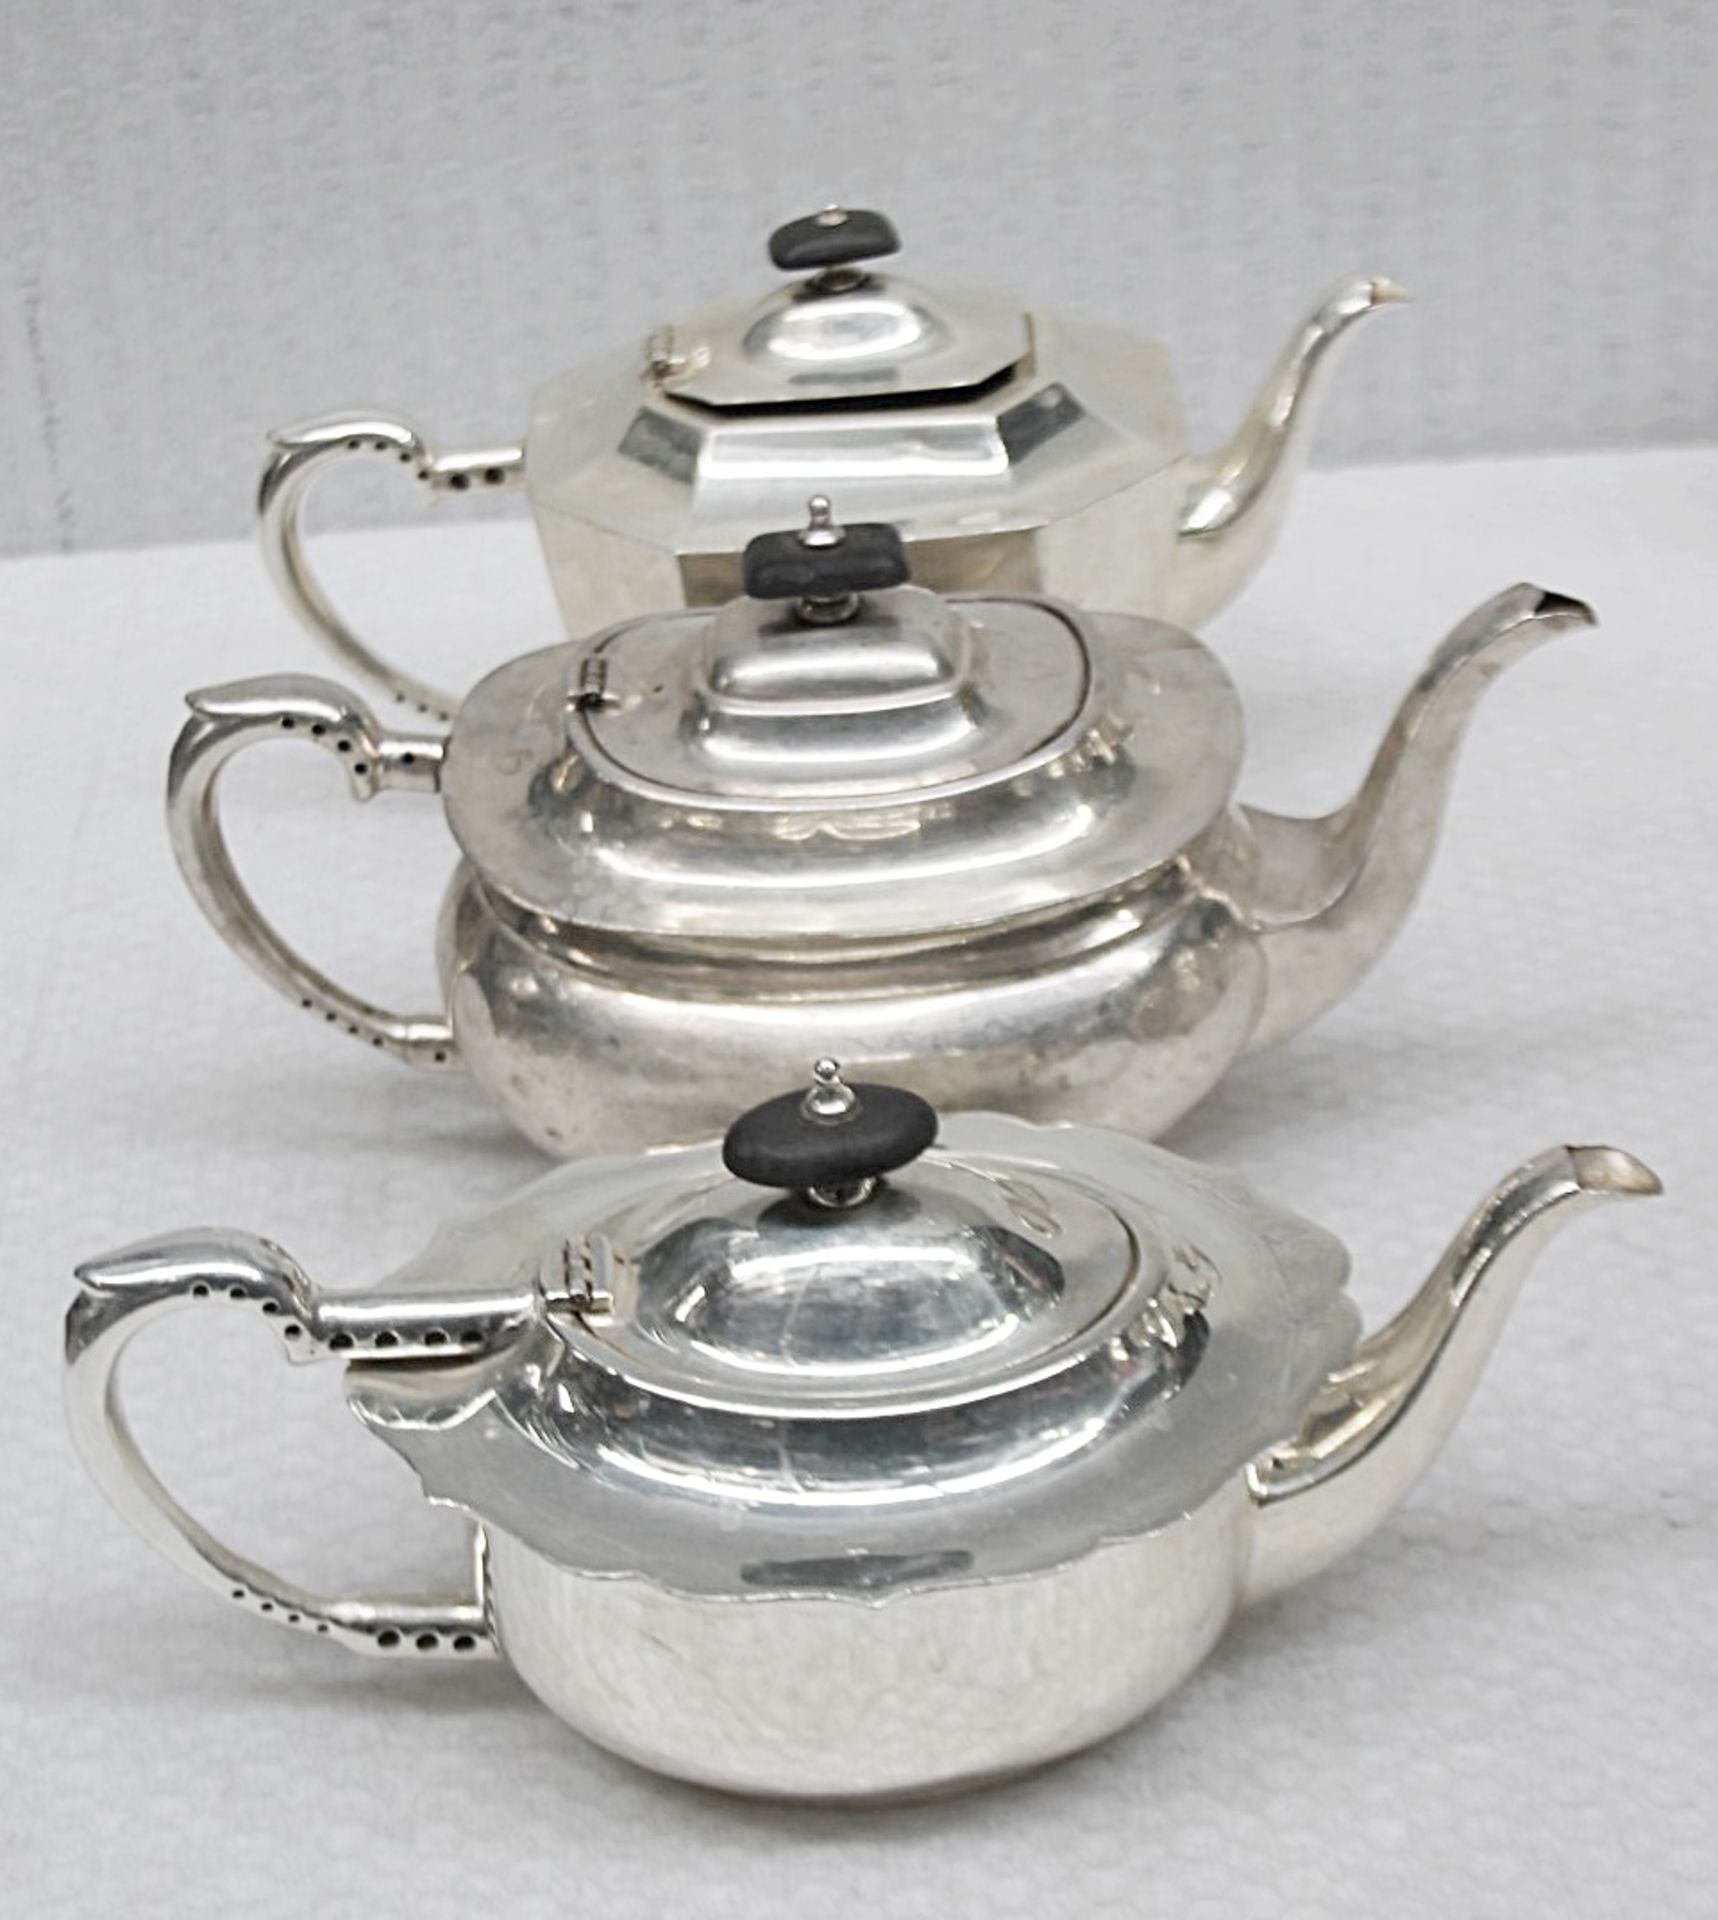 10 x Assorted Vintage Silver-Plated Teapots - Recently Removed From A Well-known London Department - Image 5 of 5